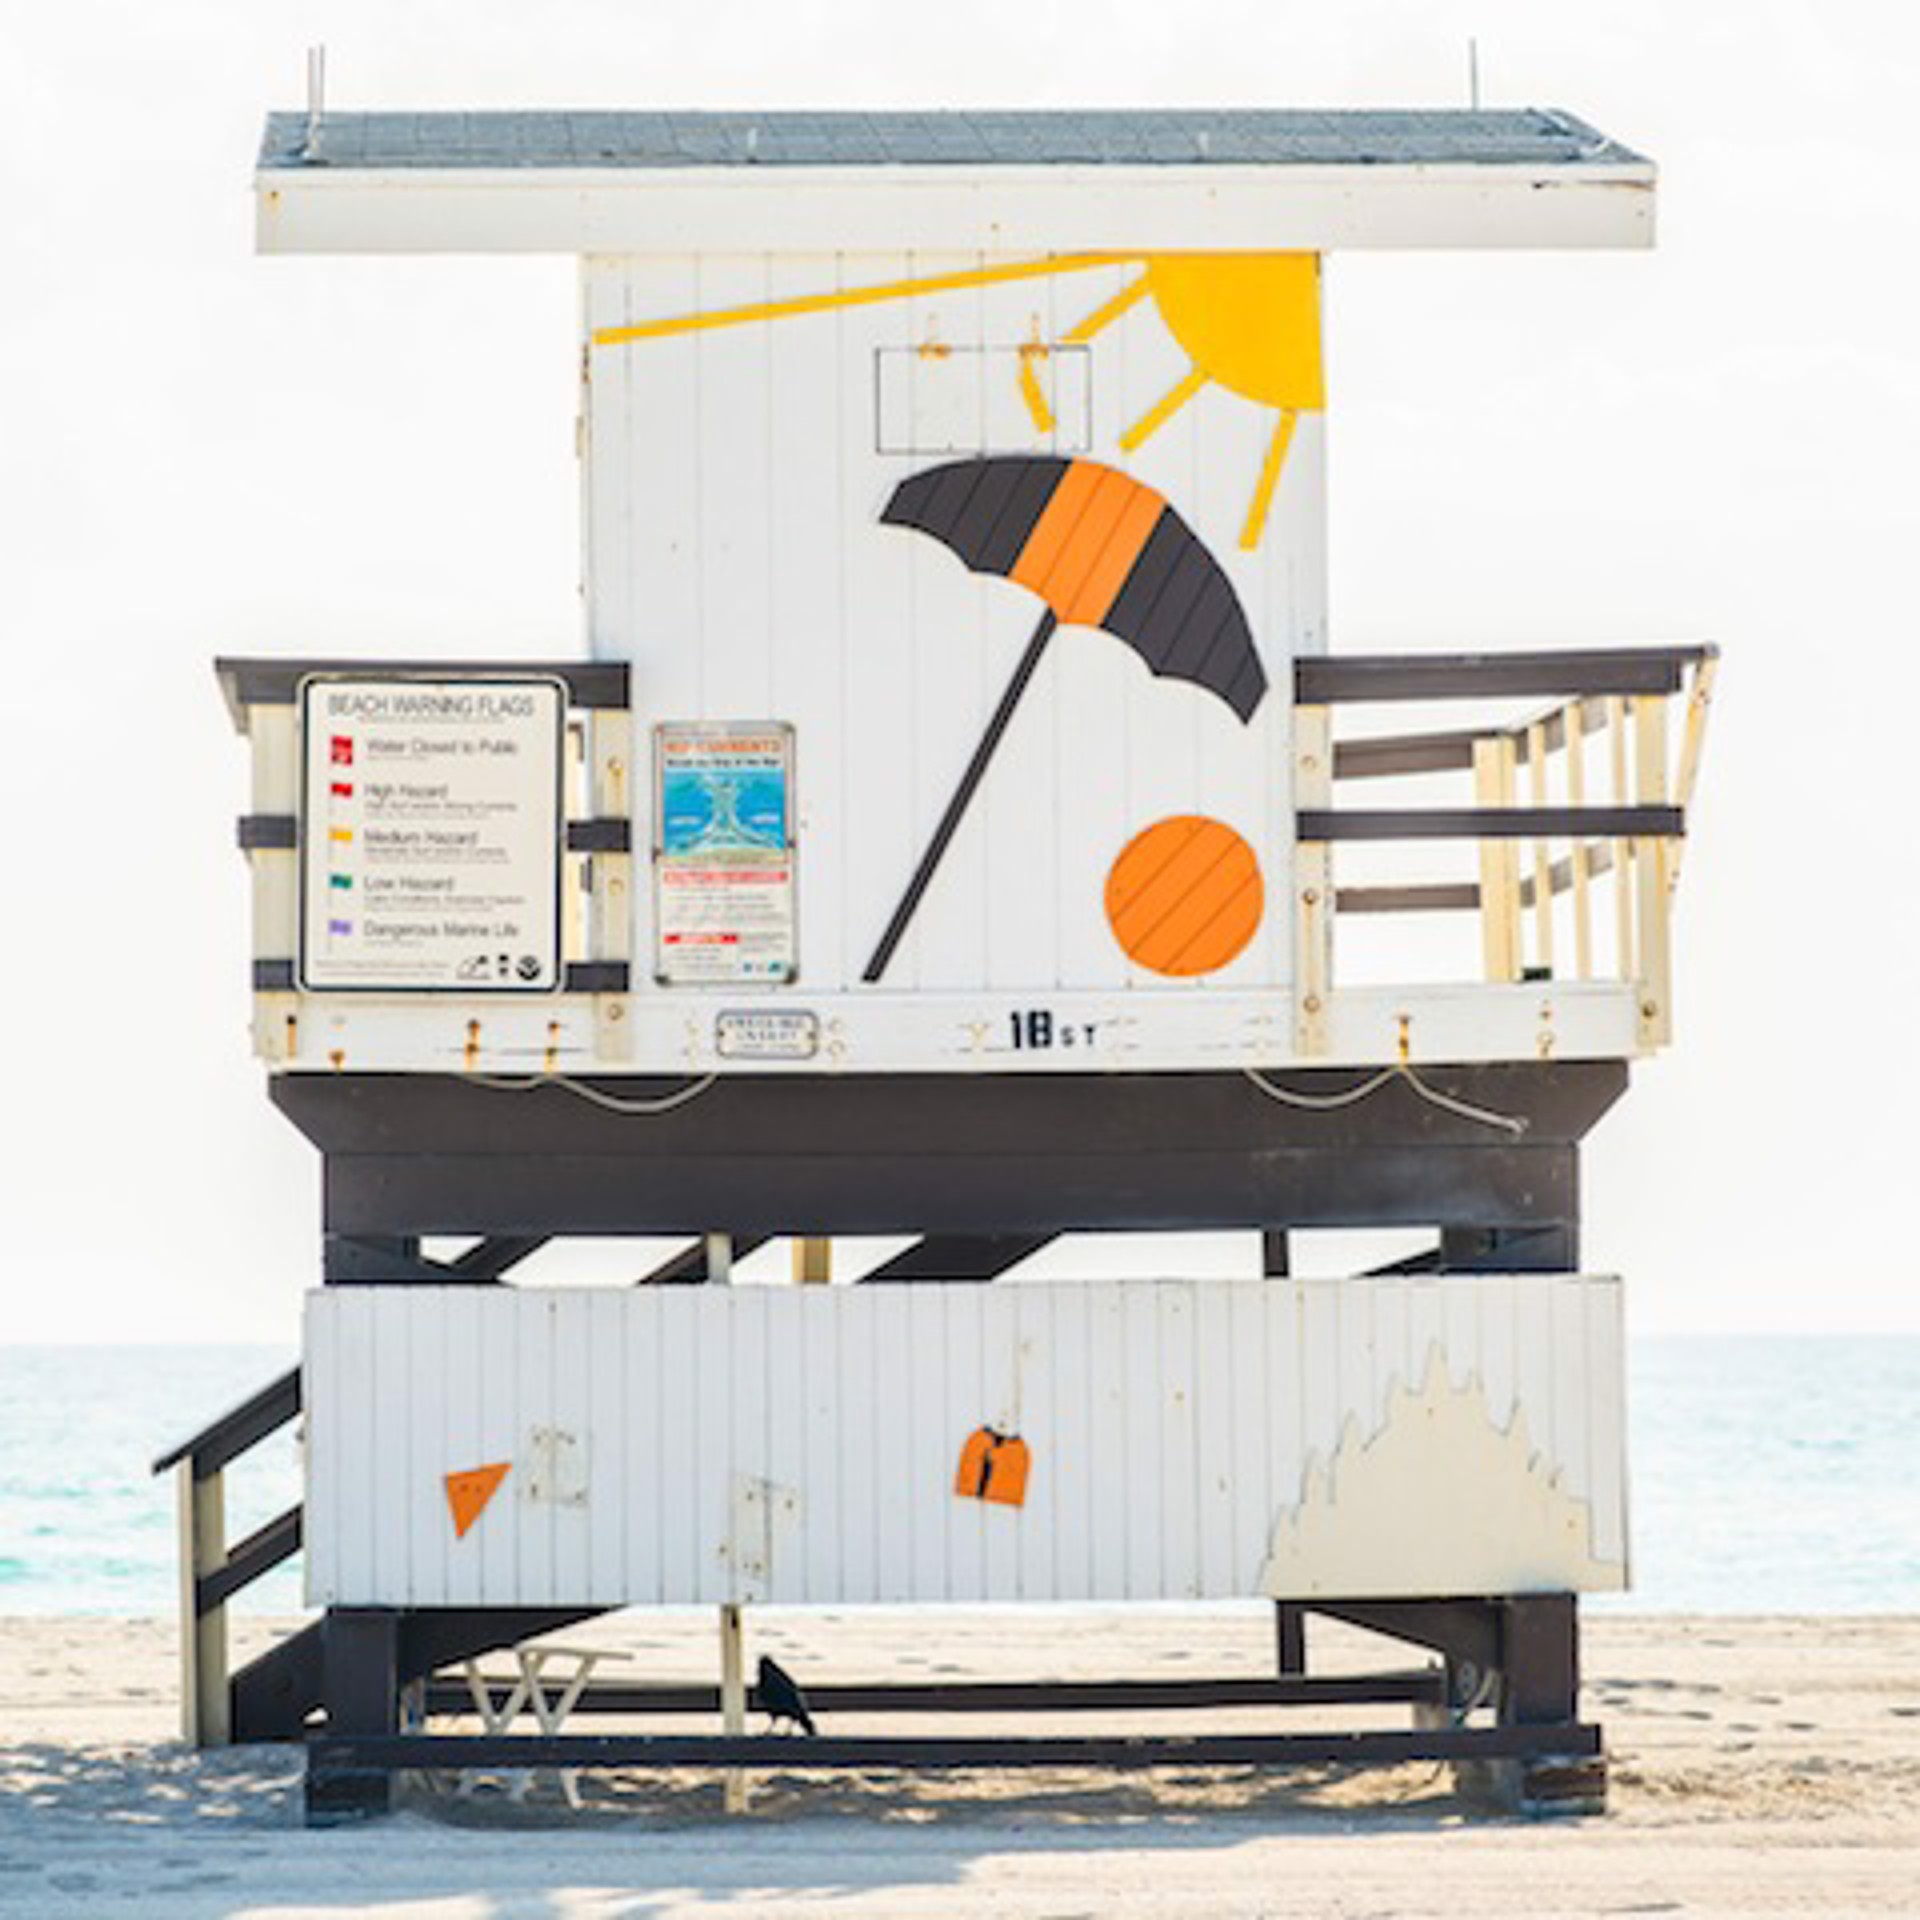 18th Street Lifeguard Stand, Rear View by Peter Mendelson